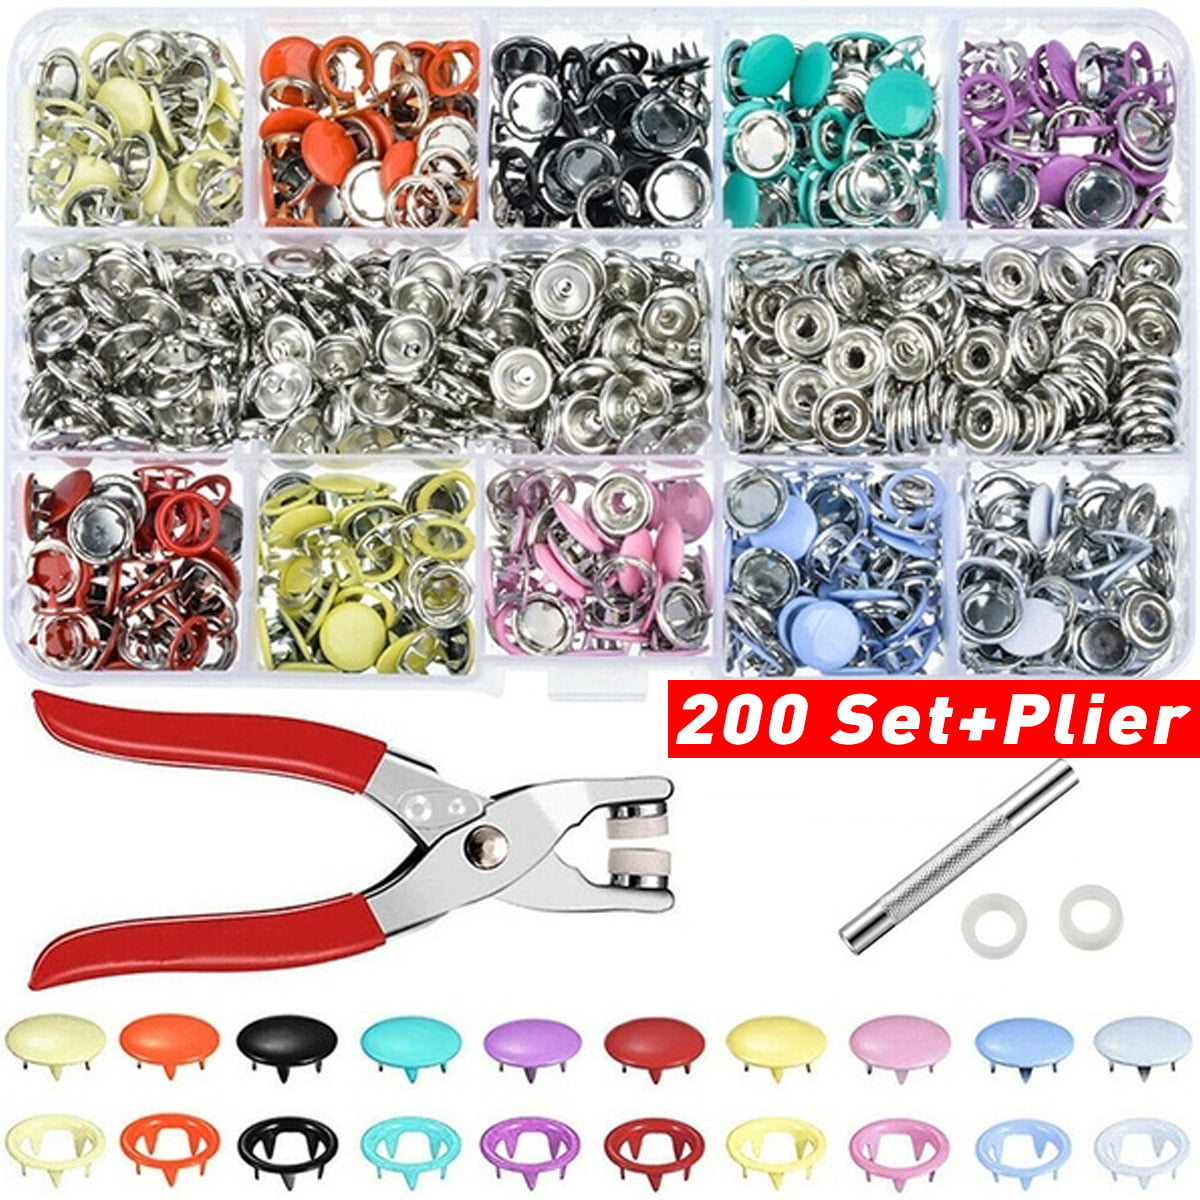 200 sets Sewing Popper Metal Copper snap Fasteners Press Covered Buttons 10-30mm